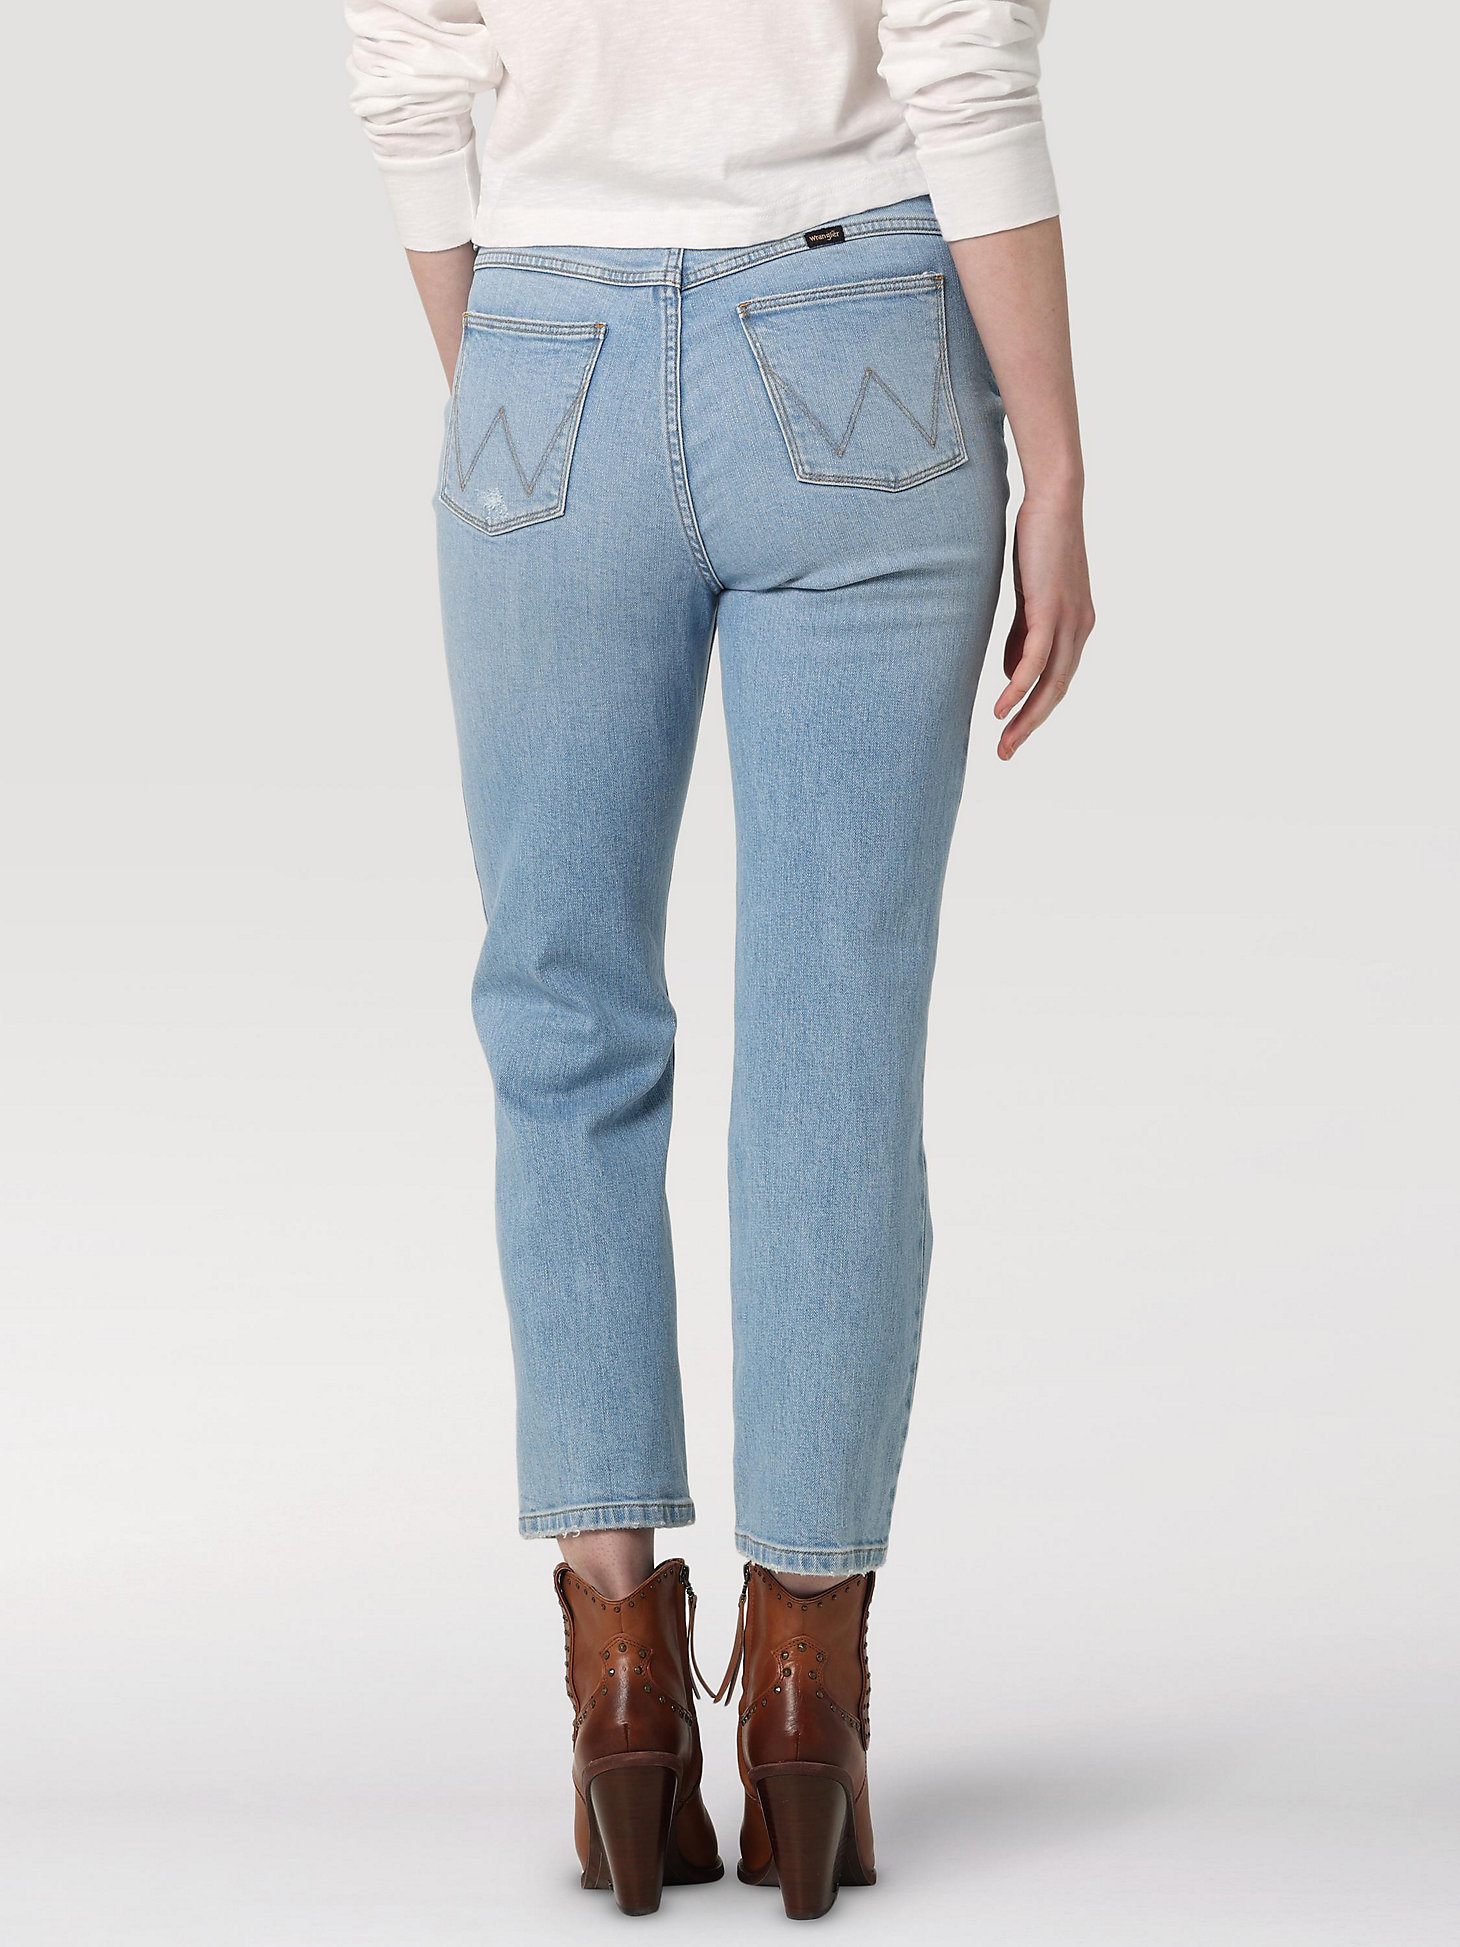 Women's High Rise Rodeo Straight Crop in Light Wash alternative view 1